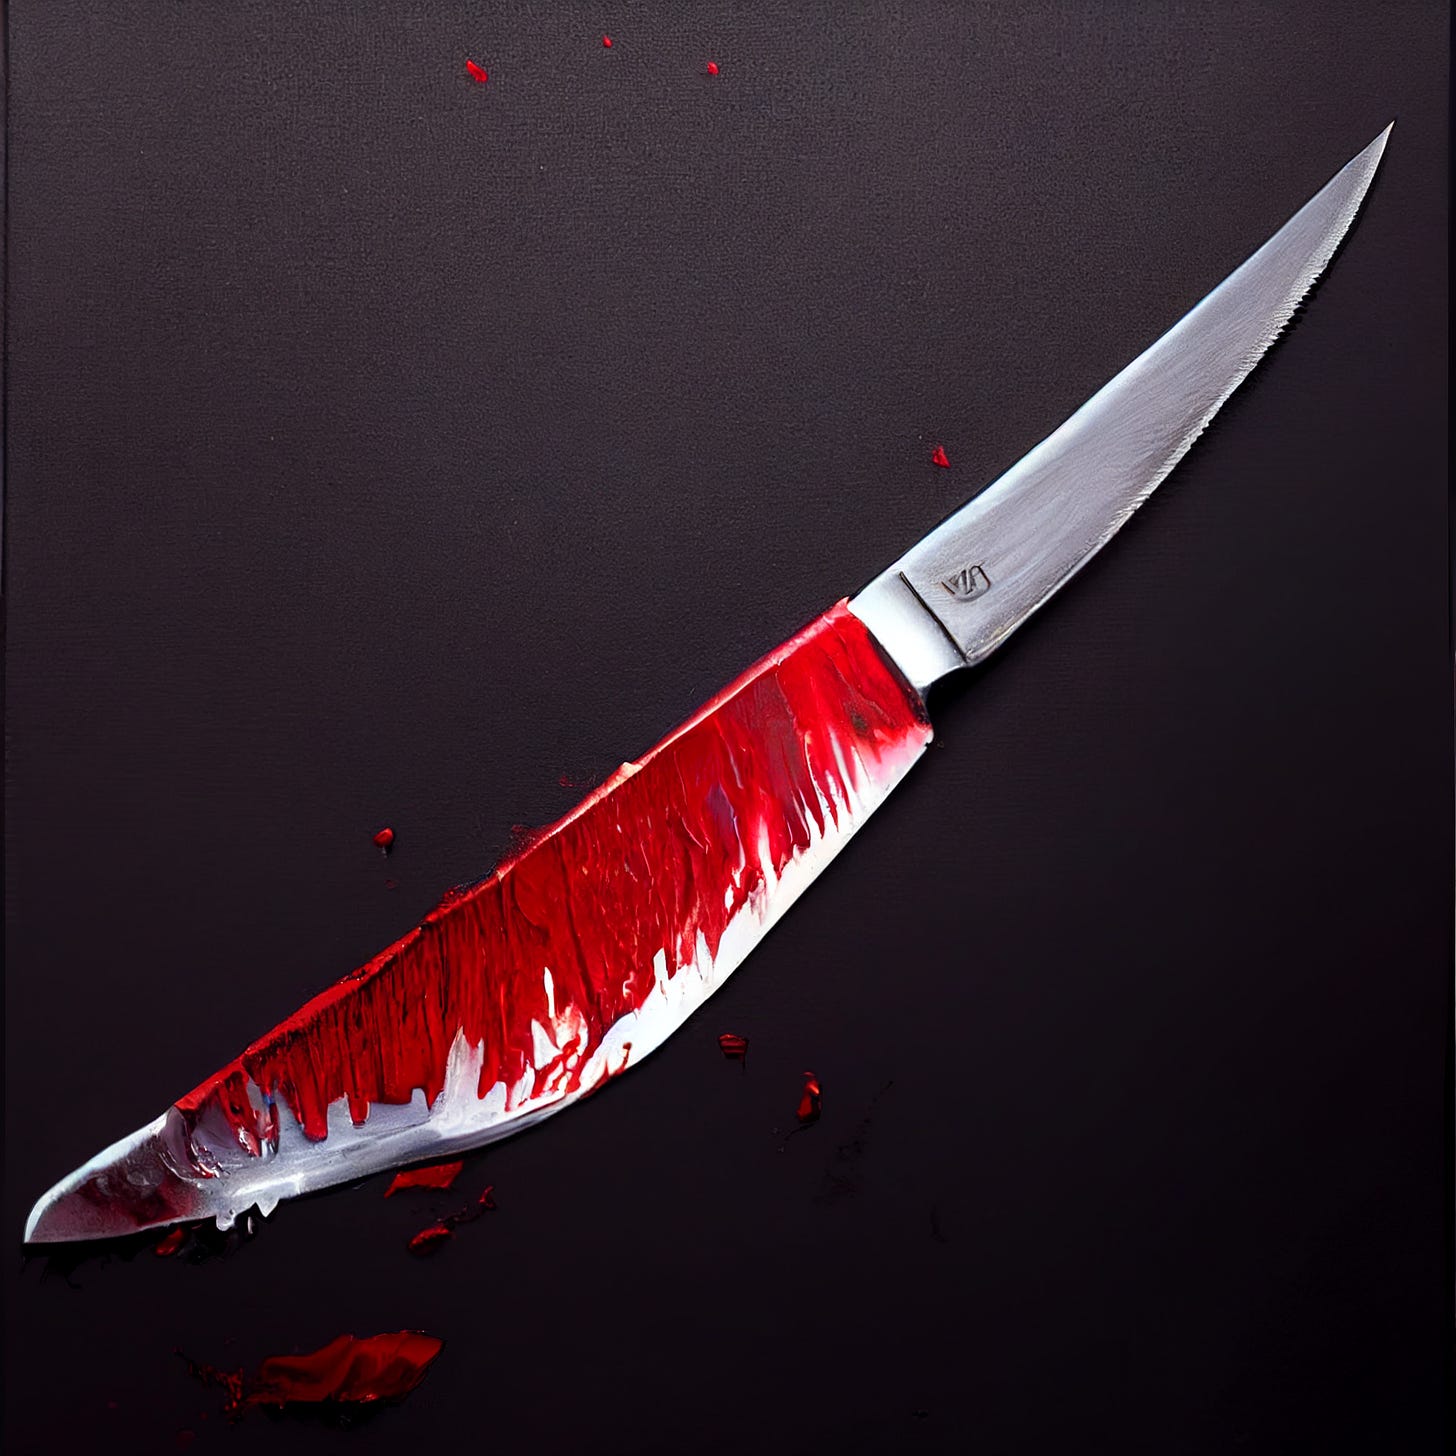 A bloody knife drawing